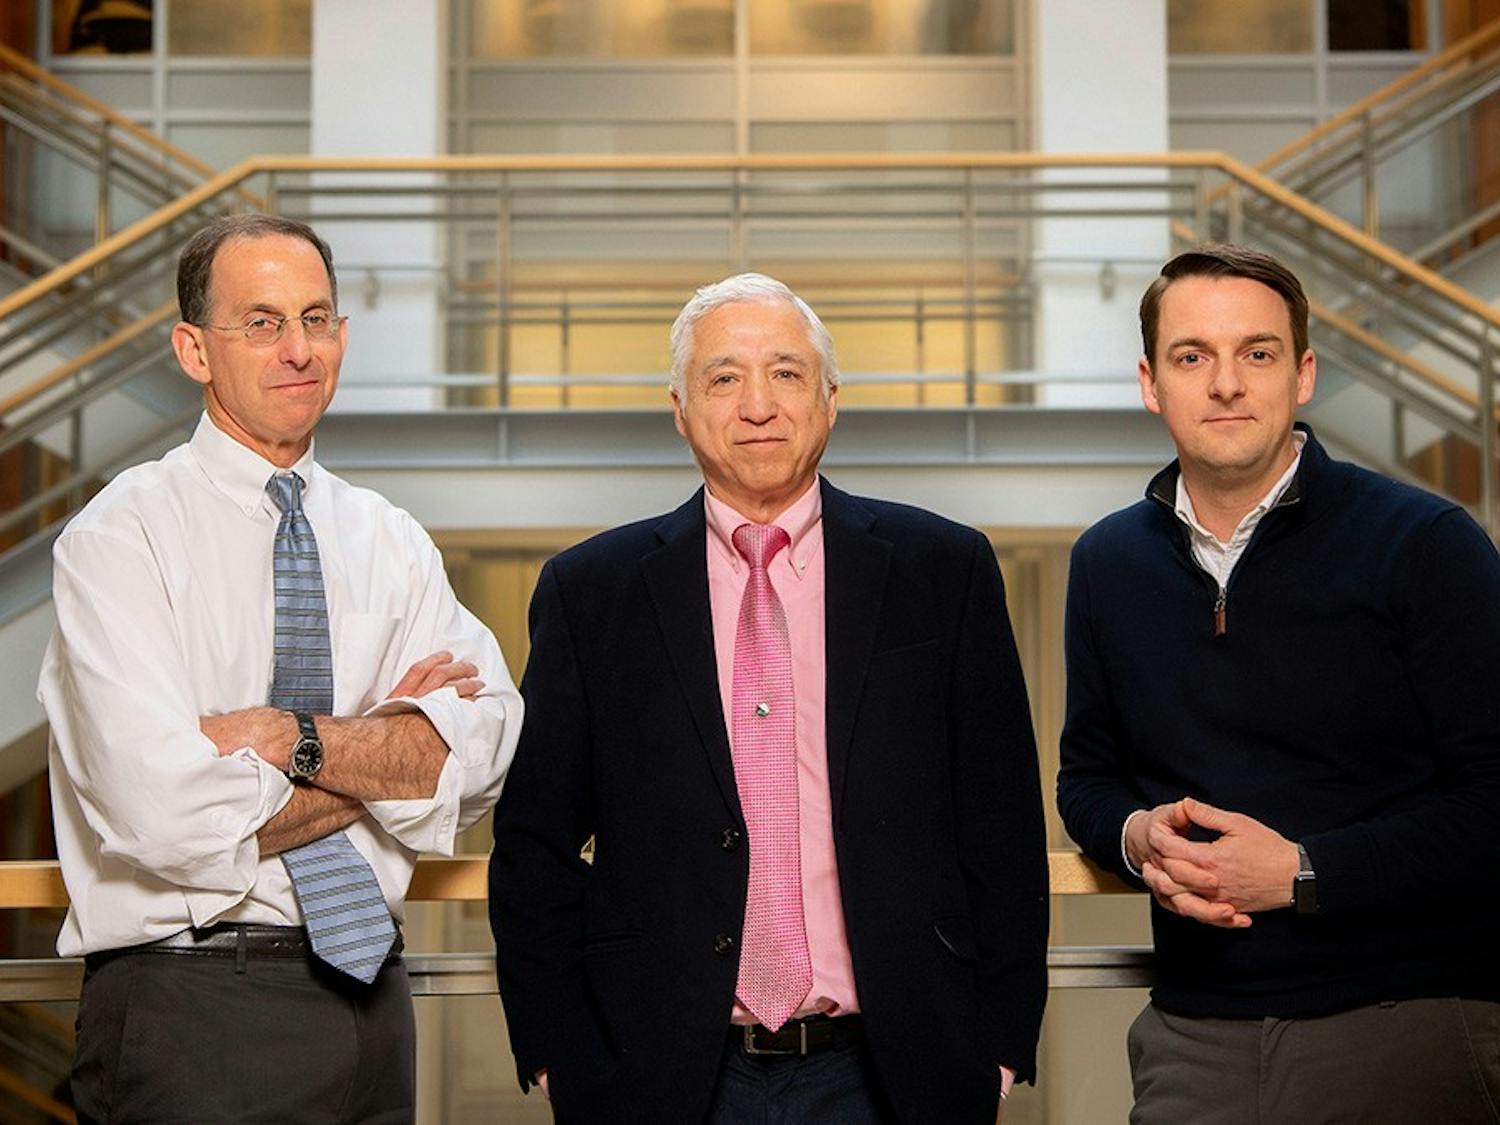 UNC-Chapel Hill HIV researchers David Margolis, MD, and J. Victor Garcia, PhD, along with Rick Dunham from ViiV Healthcare (from left to right). Margolis is director of the UNC HIV Cure Center, which is home to Qura Therapeutics, a company formed through a partnership between UNC-Chapel Hill and ViiV, formerly the HIV research wing of GSK.
Photographed January 21, 2020 at the Genetic Medicine Building on the campus of the University of North Carolina at Chapel Hill. Photo courtesy of Jon Gardiner/UNC-Chapel Hill.